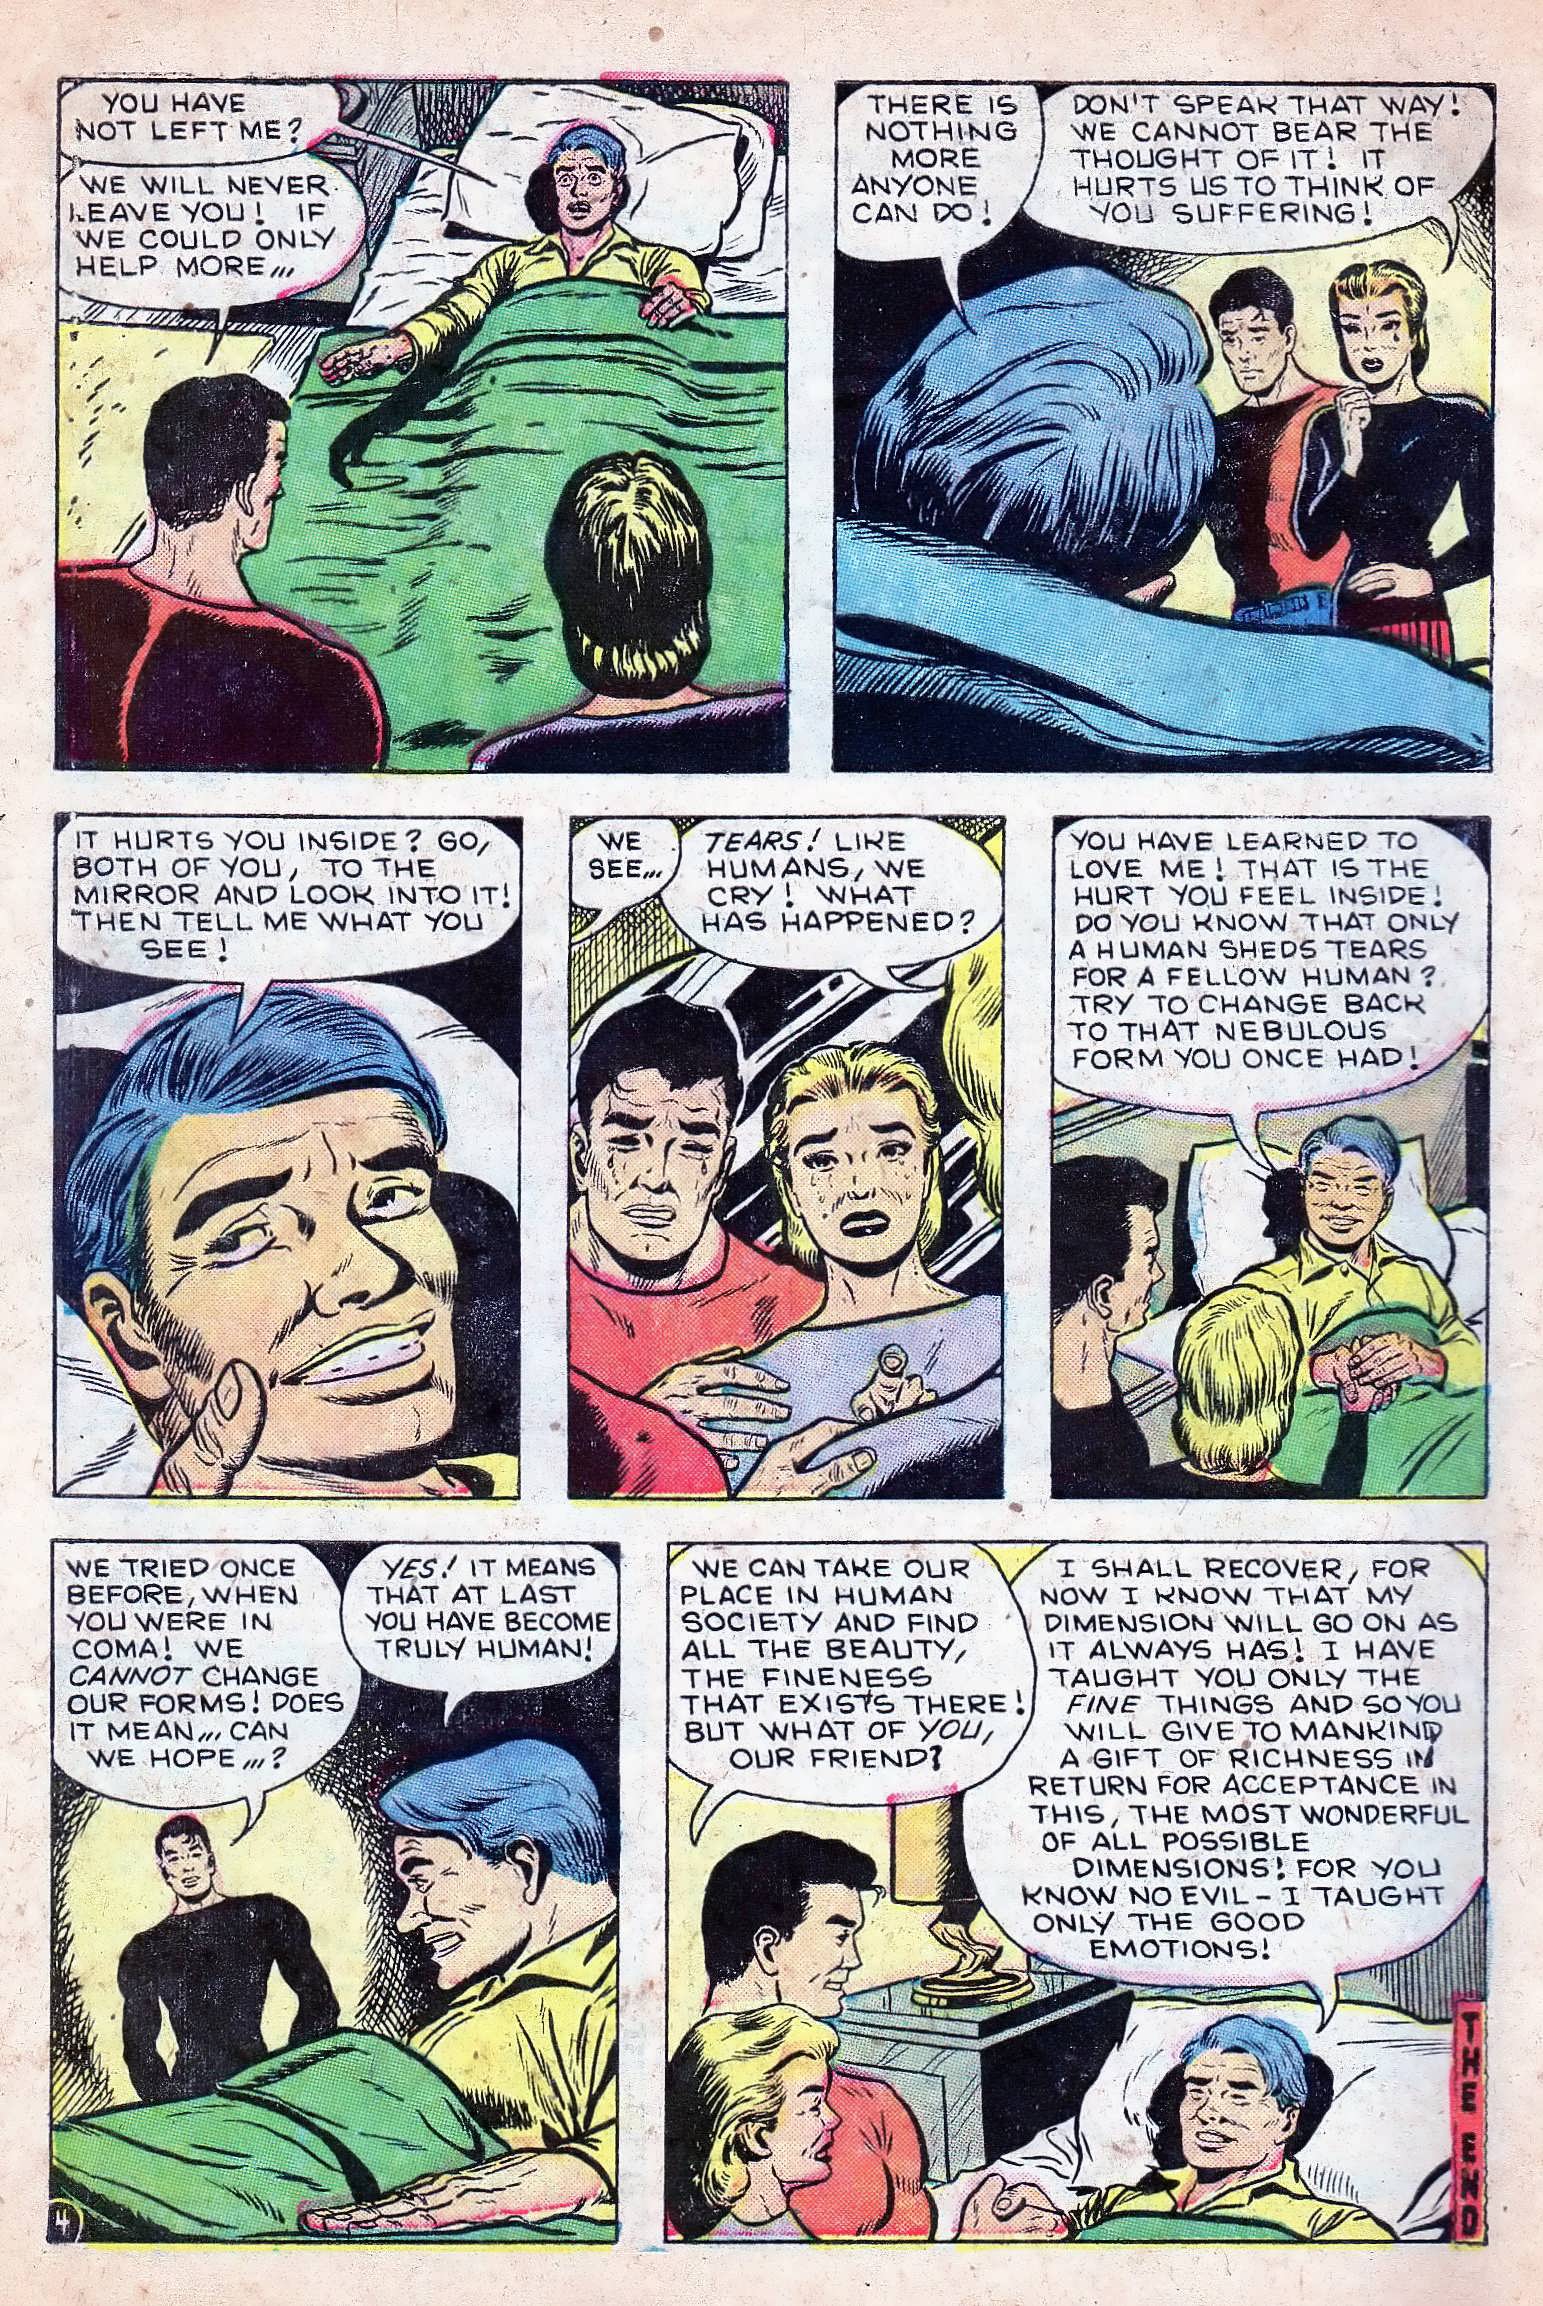 Marvel Tales (1949) 141 Page 5